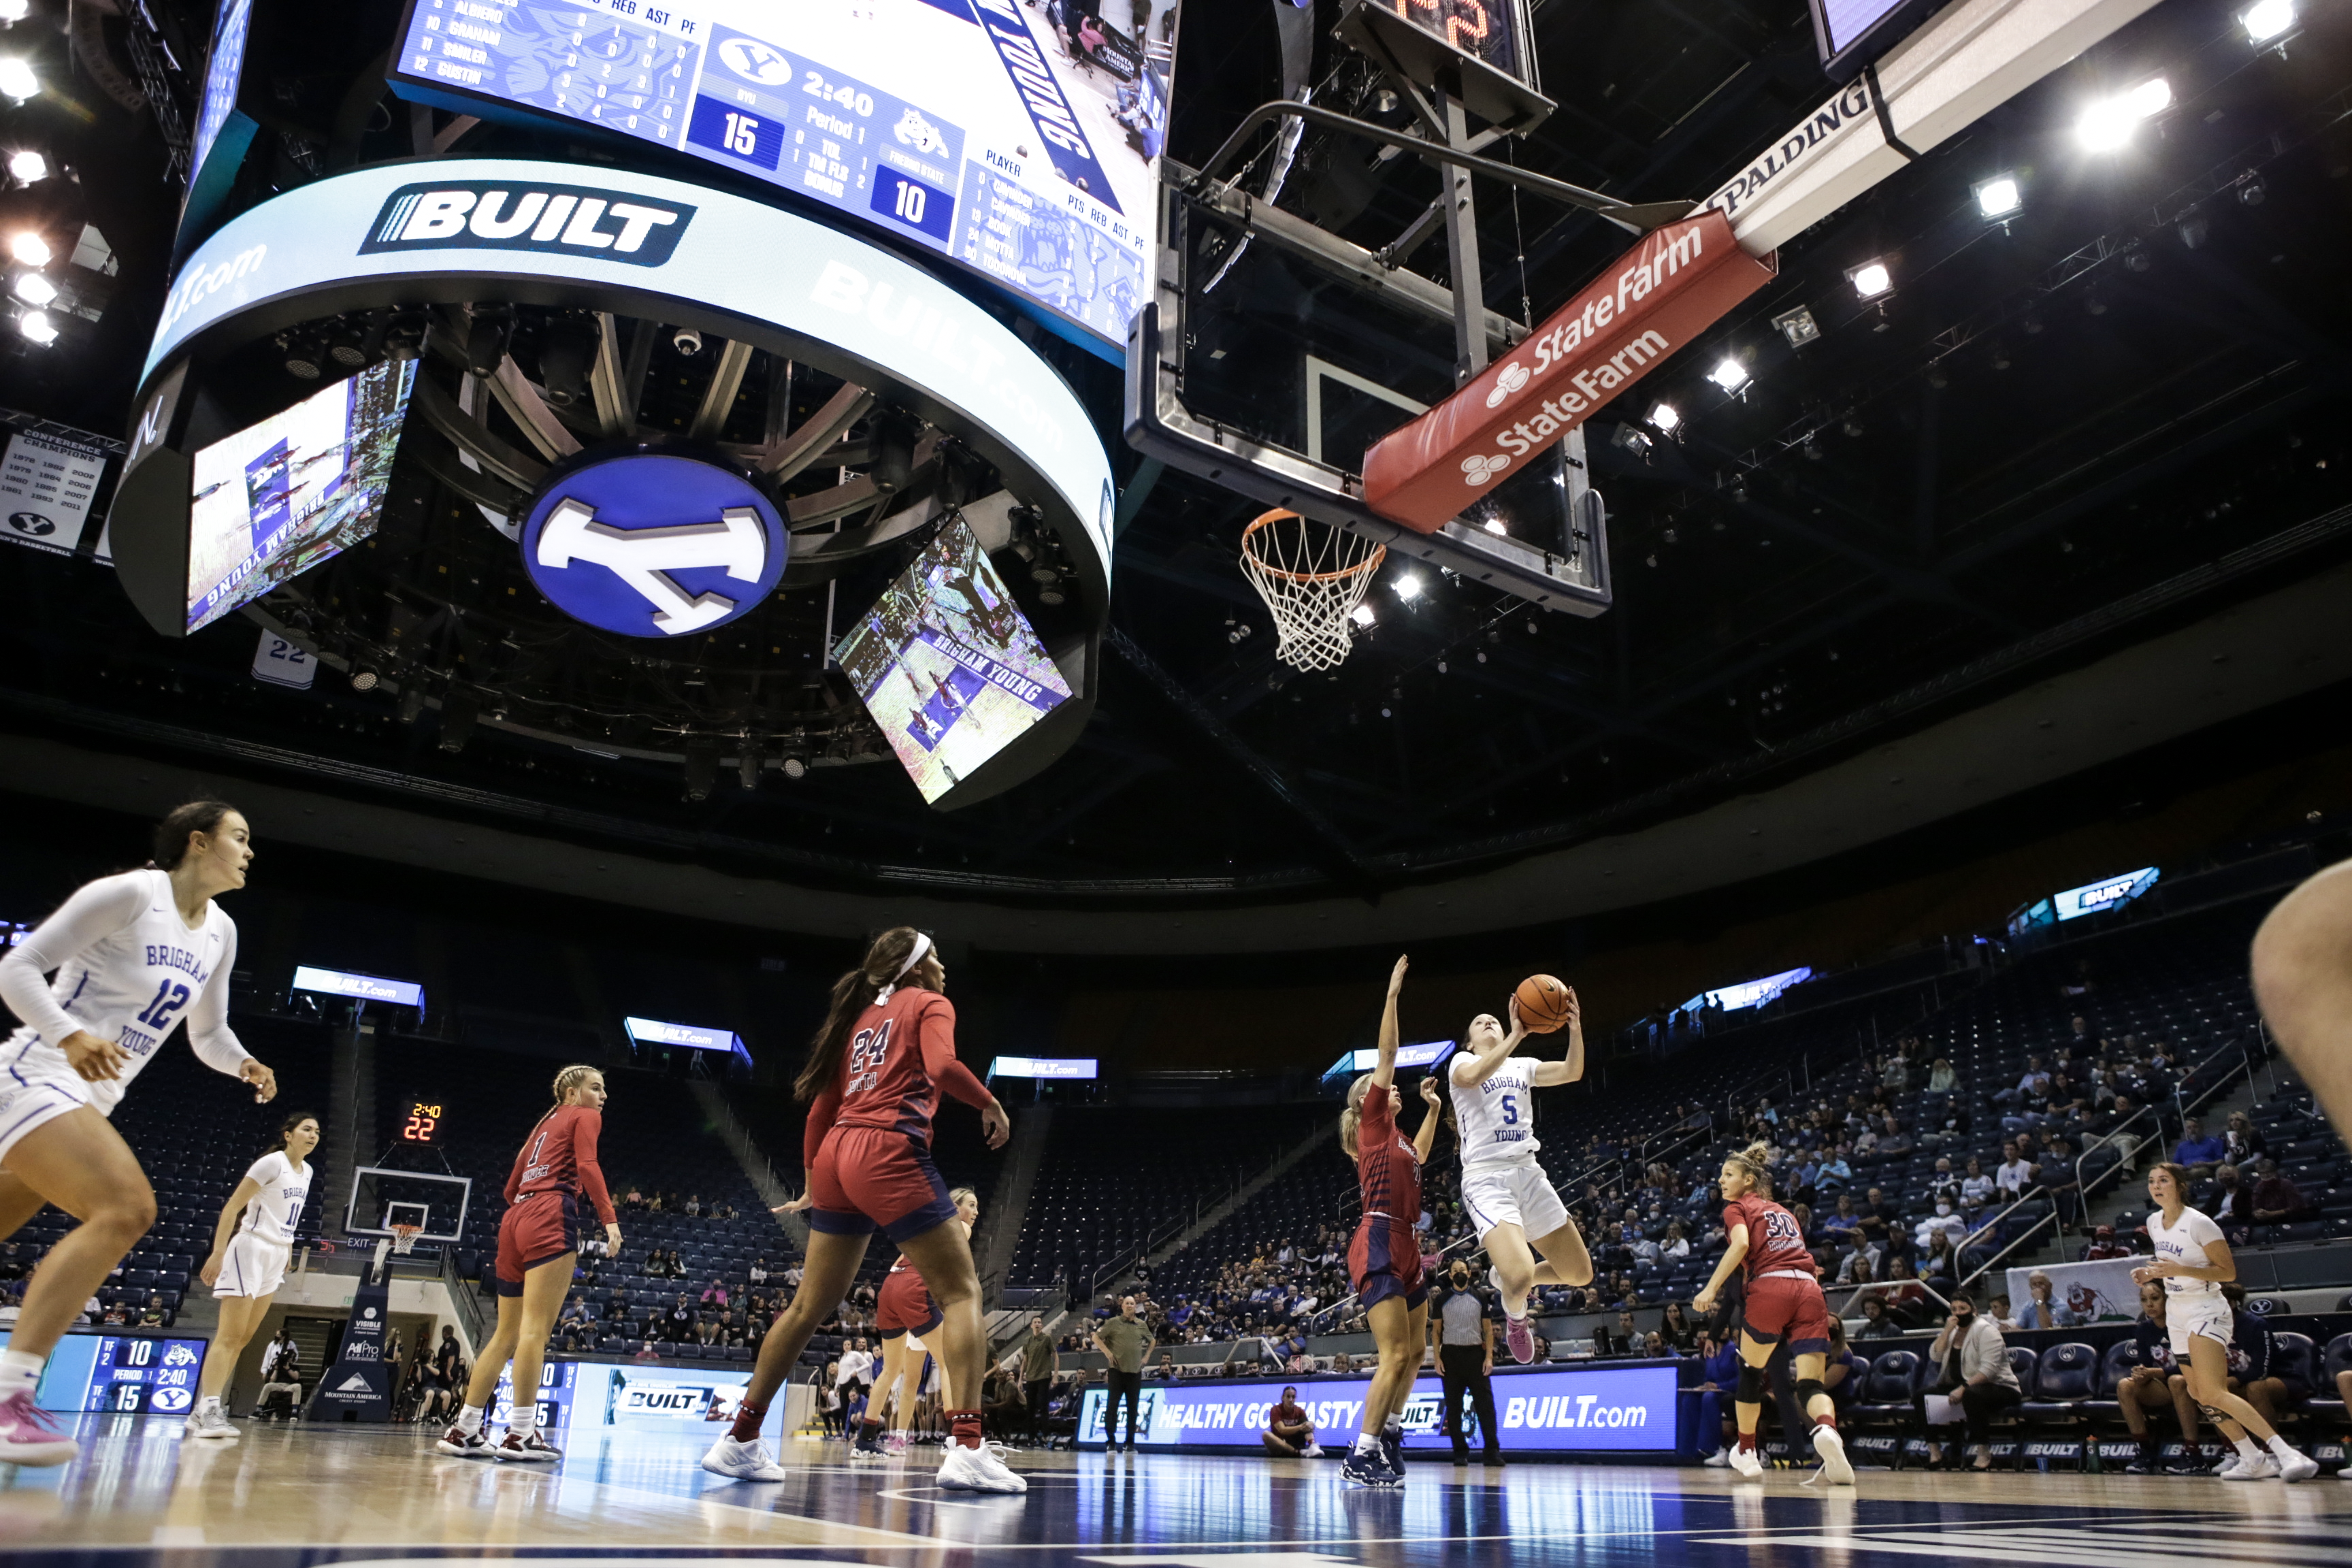 Maria Albiero drives to the basket in an 80-64 BYU win over the Fresno State Bulldogs in the Marriott Center.